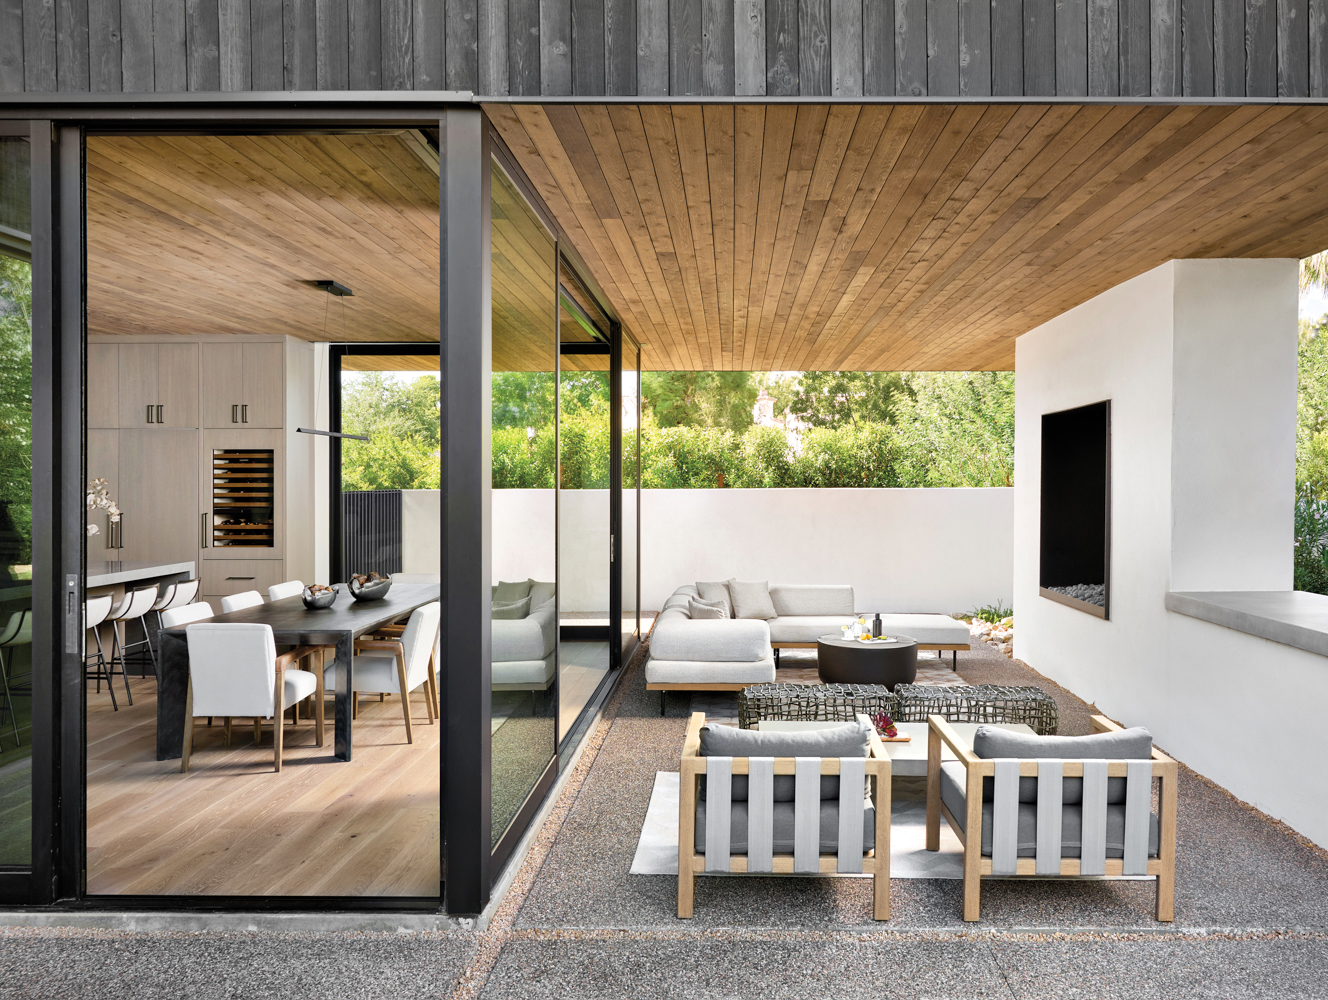 The patio outside the dining room, which has a collection of gray seating. Floor-to-ceiling glass doors open to blend the indoors and outdoors.